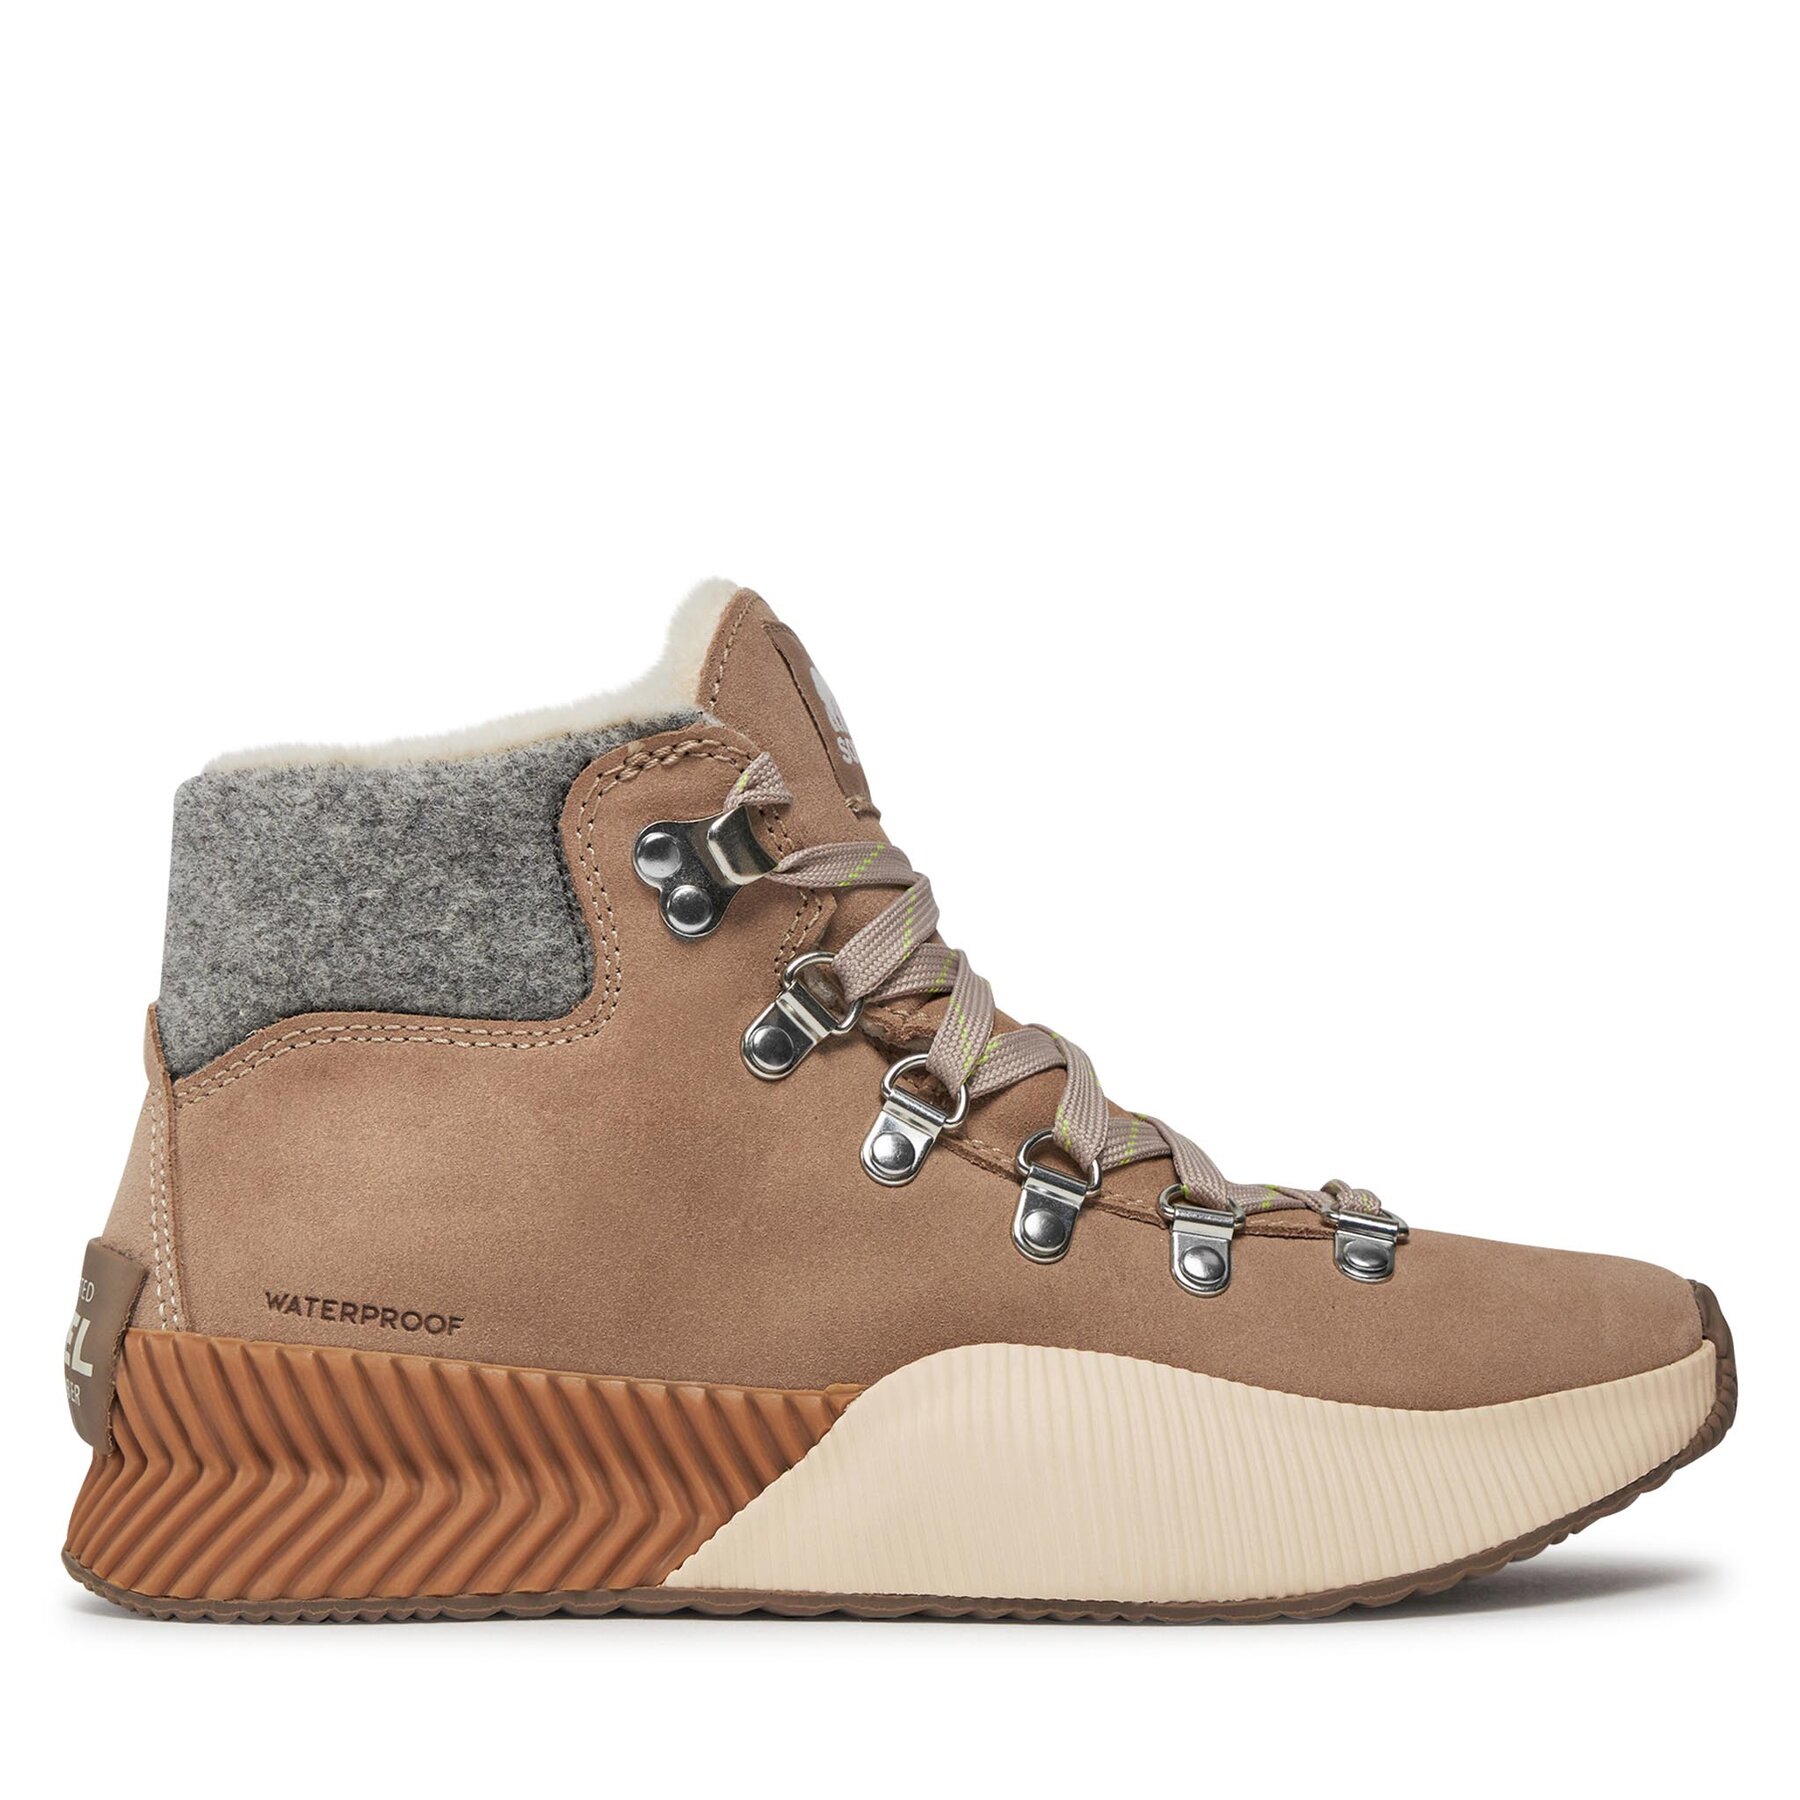 Stiefeletten Sorel Out N About™ Iii Conquest Wp NL4434-264 Omega Taupe/Gum 2 von Sorel